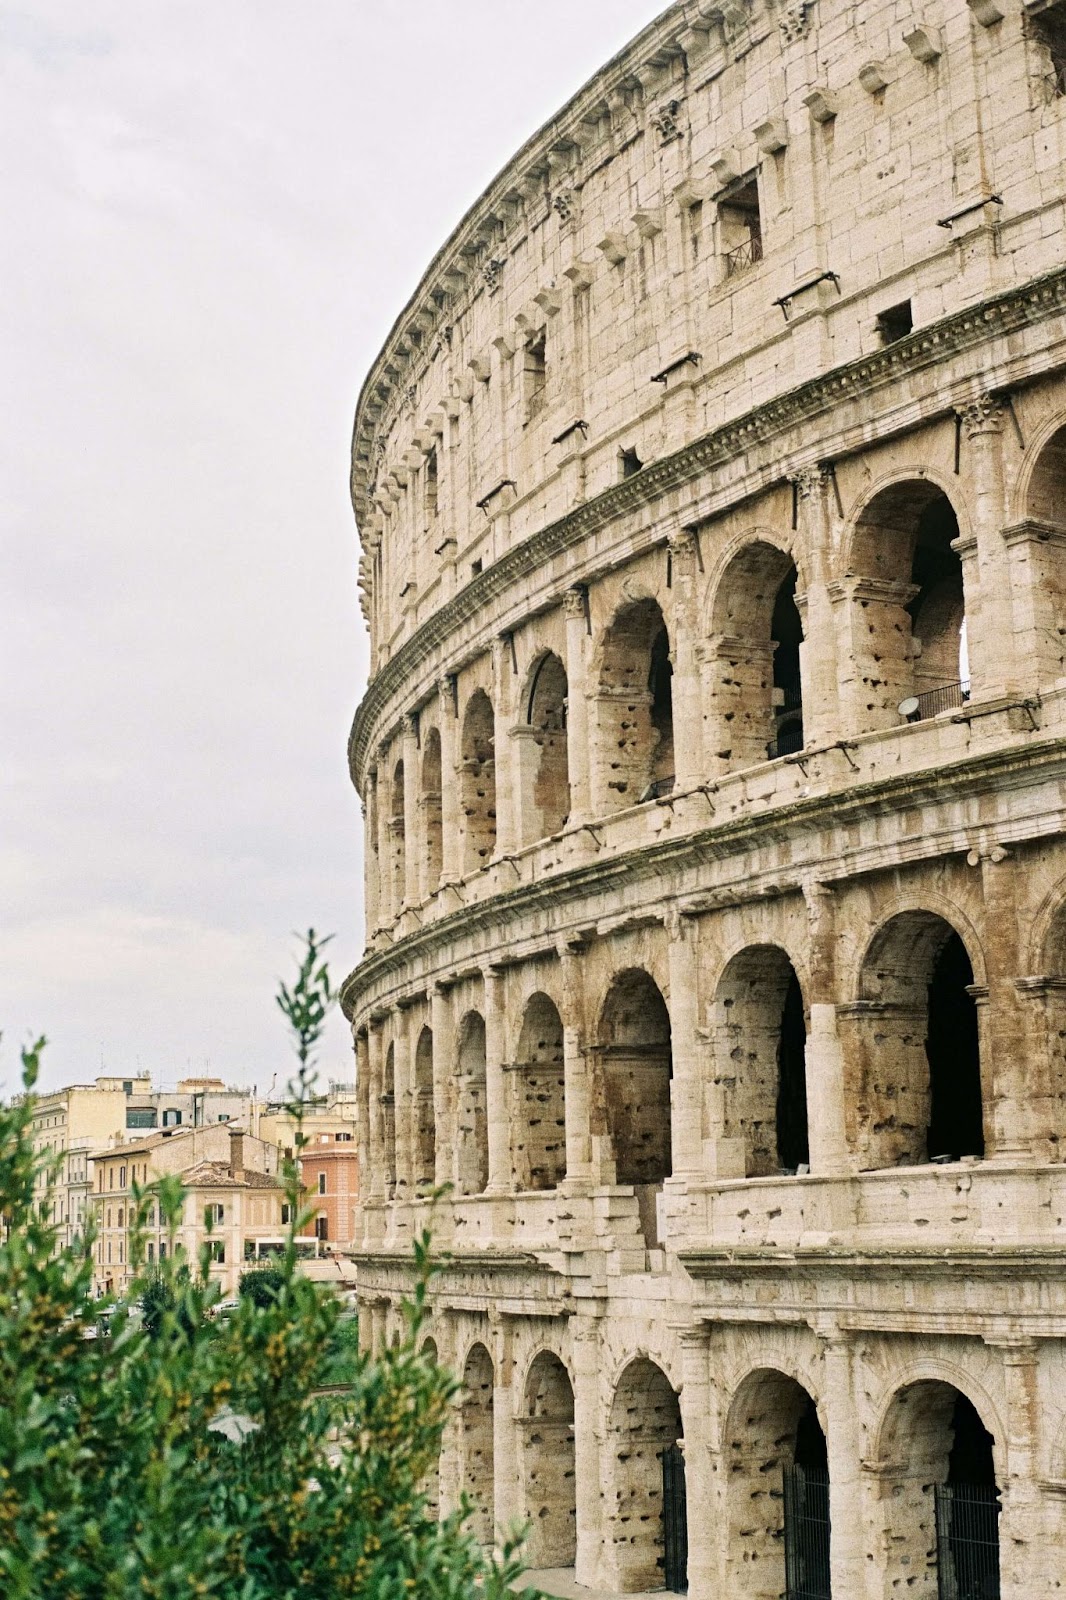 24 hours in Rome, the Colosseum is the most iconic ancient building in Rome, Italy.